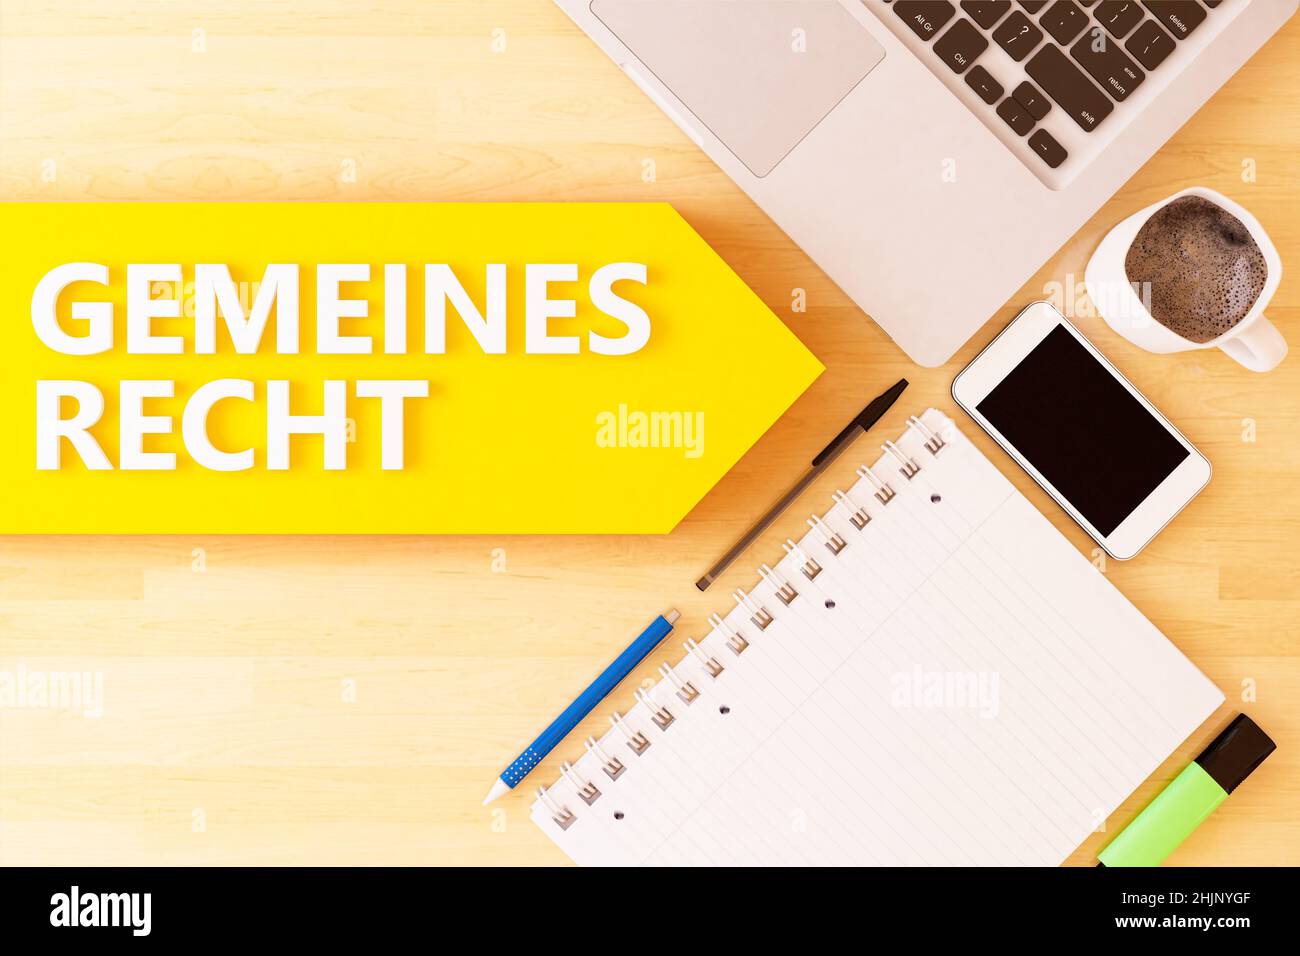 Gemeines Recht - german word for common right - linear text arrow concept with notebook, smartphone, pens and coffee mug on desktop - 3D render illust Stock Photo